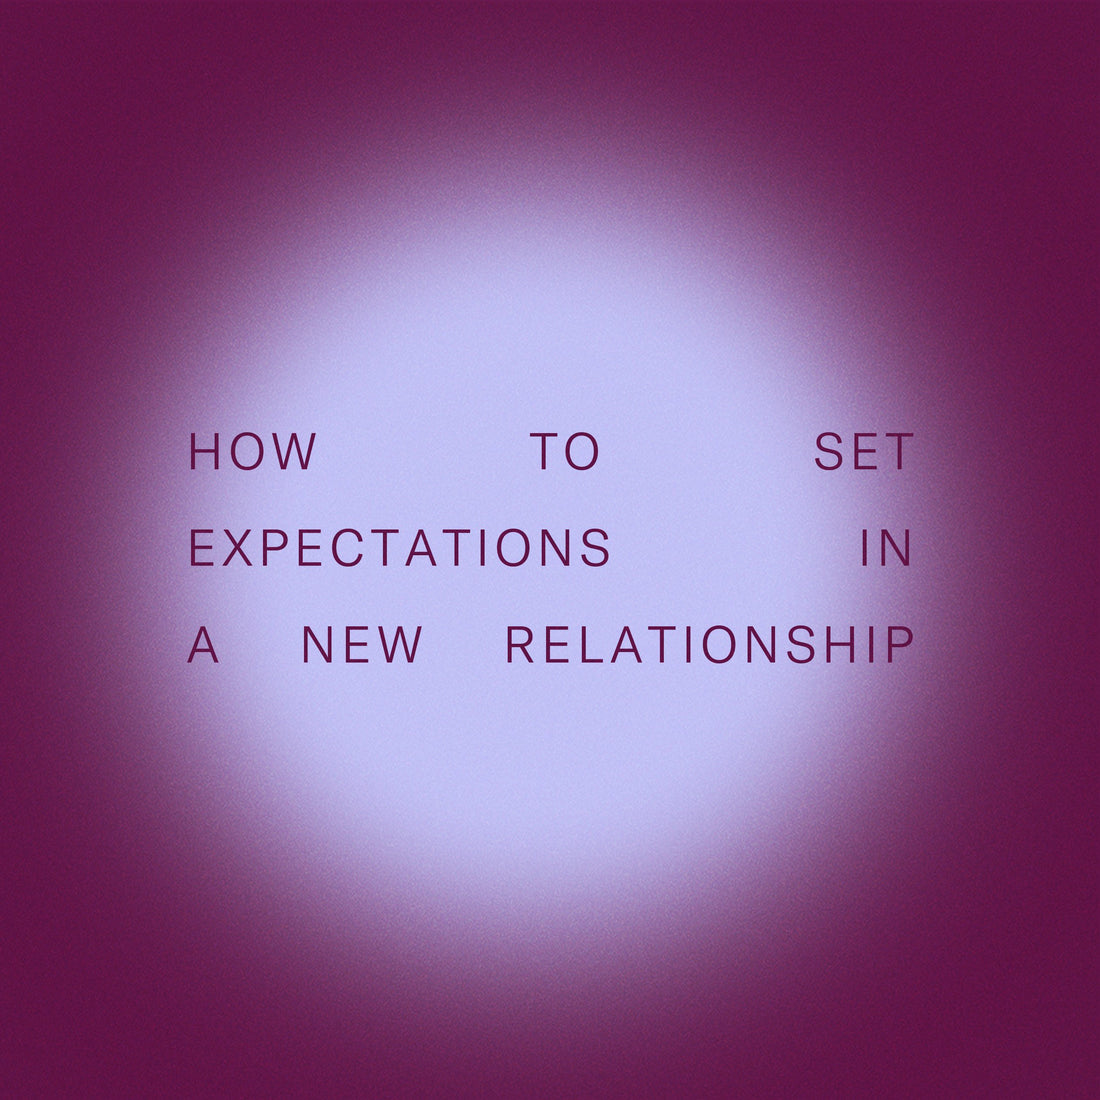 Image shows text reading how to set expectations in a new relationship.